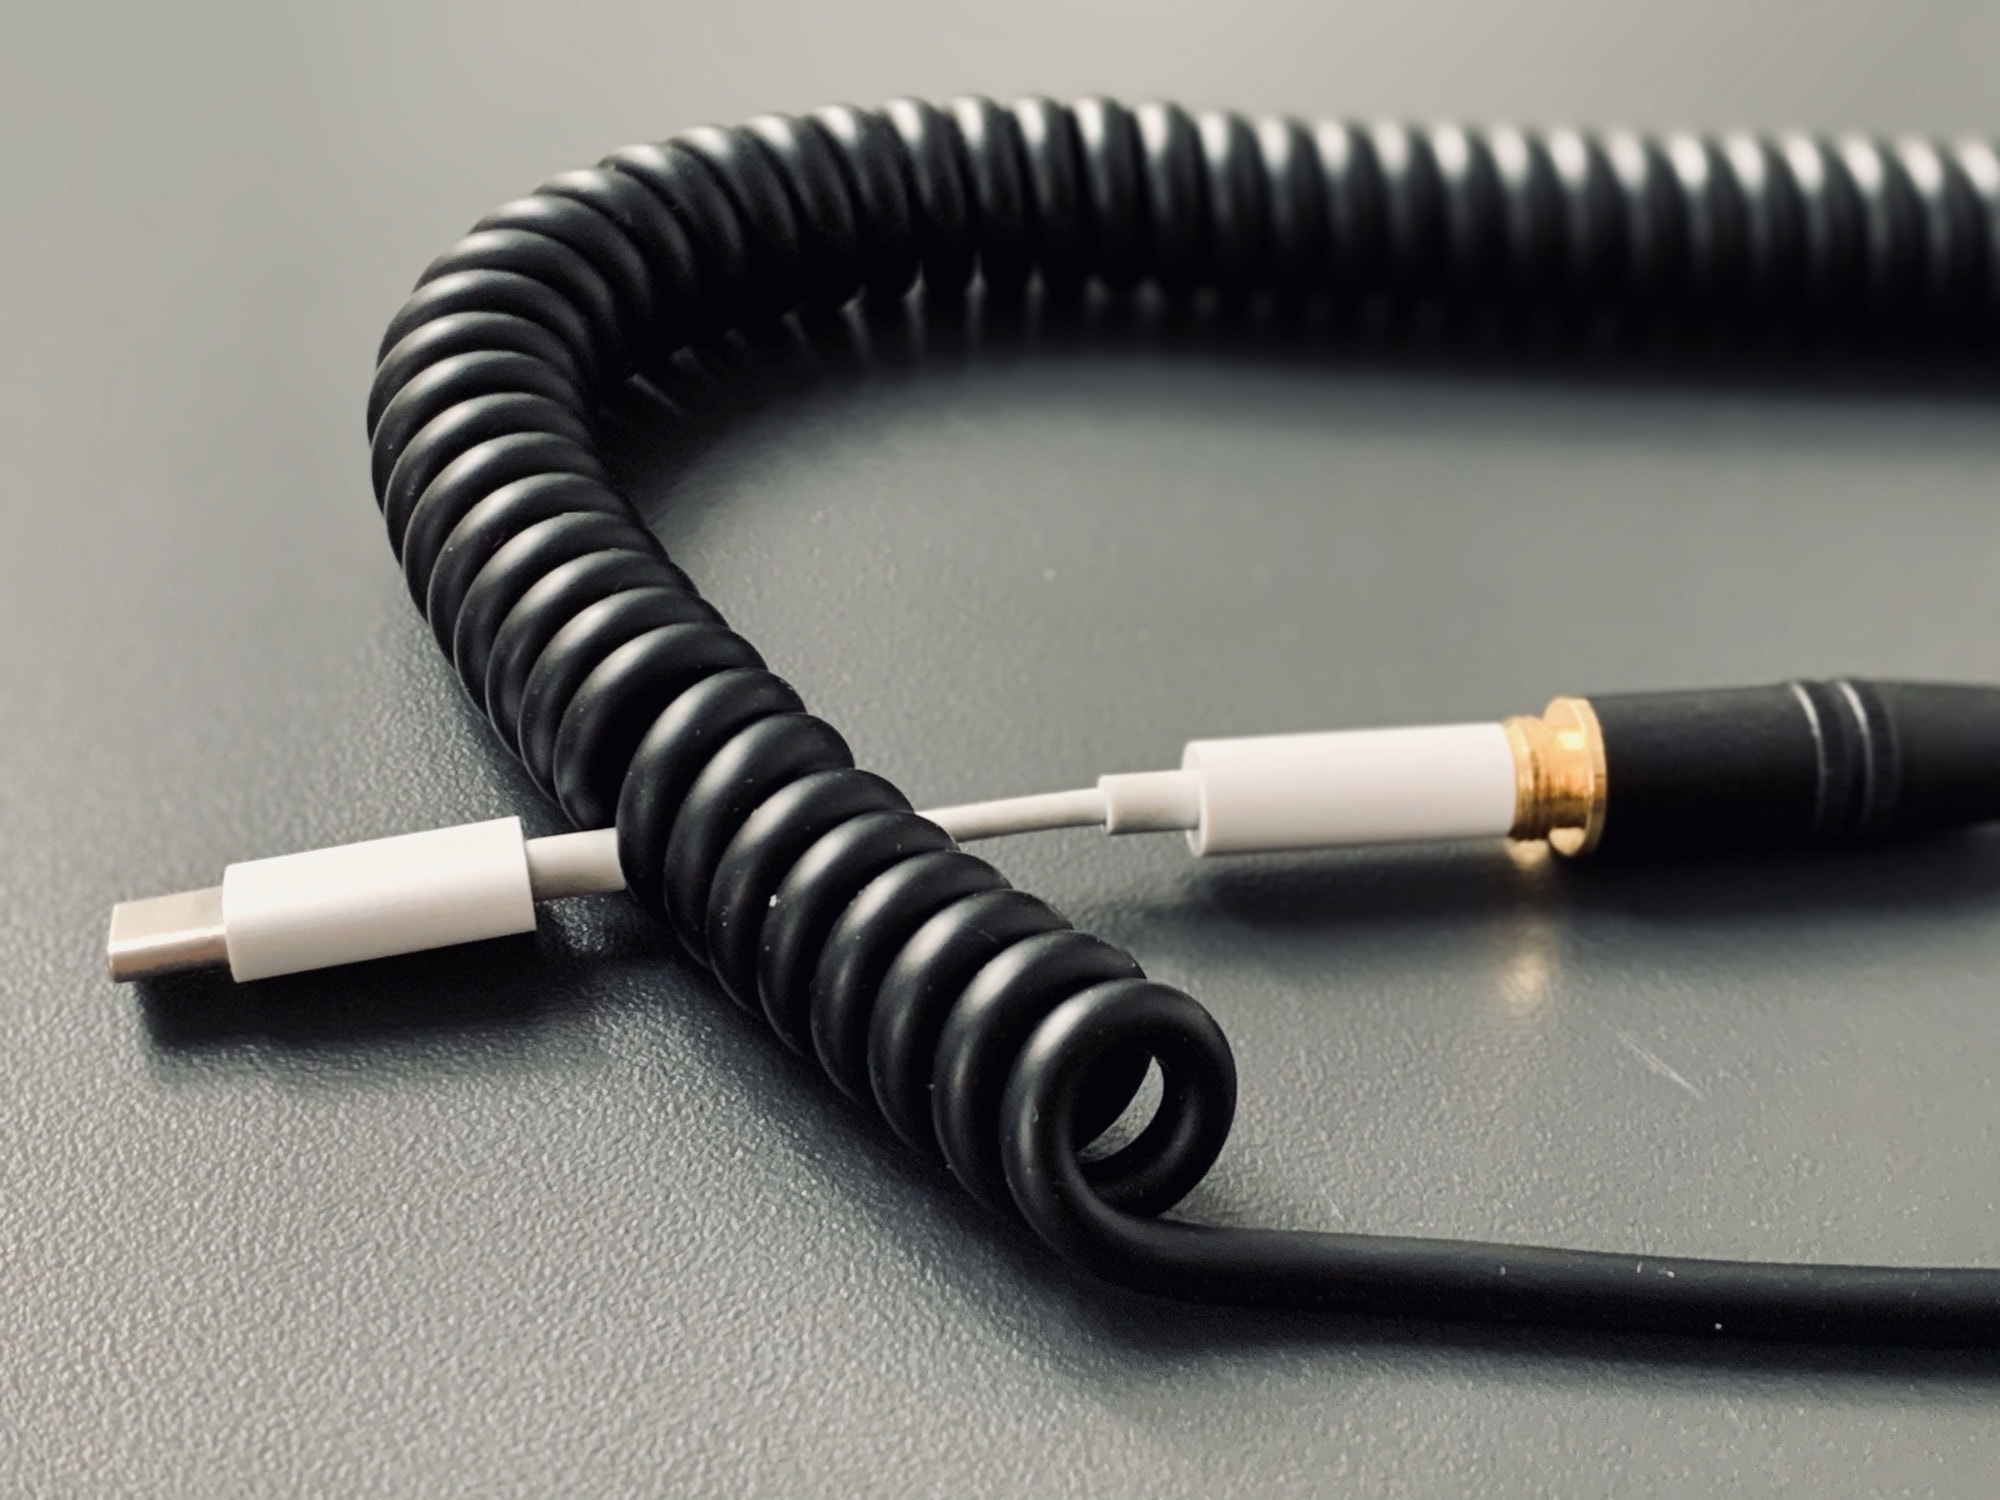 Dongle-tangling is the hottest thing since AirPods.